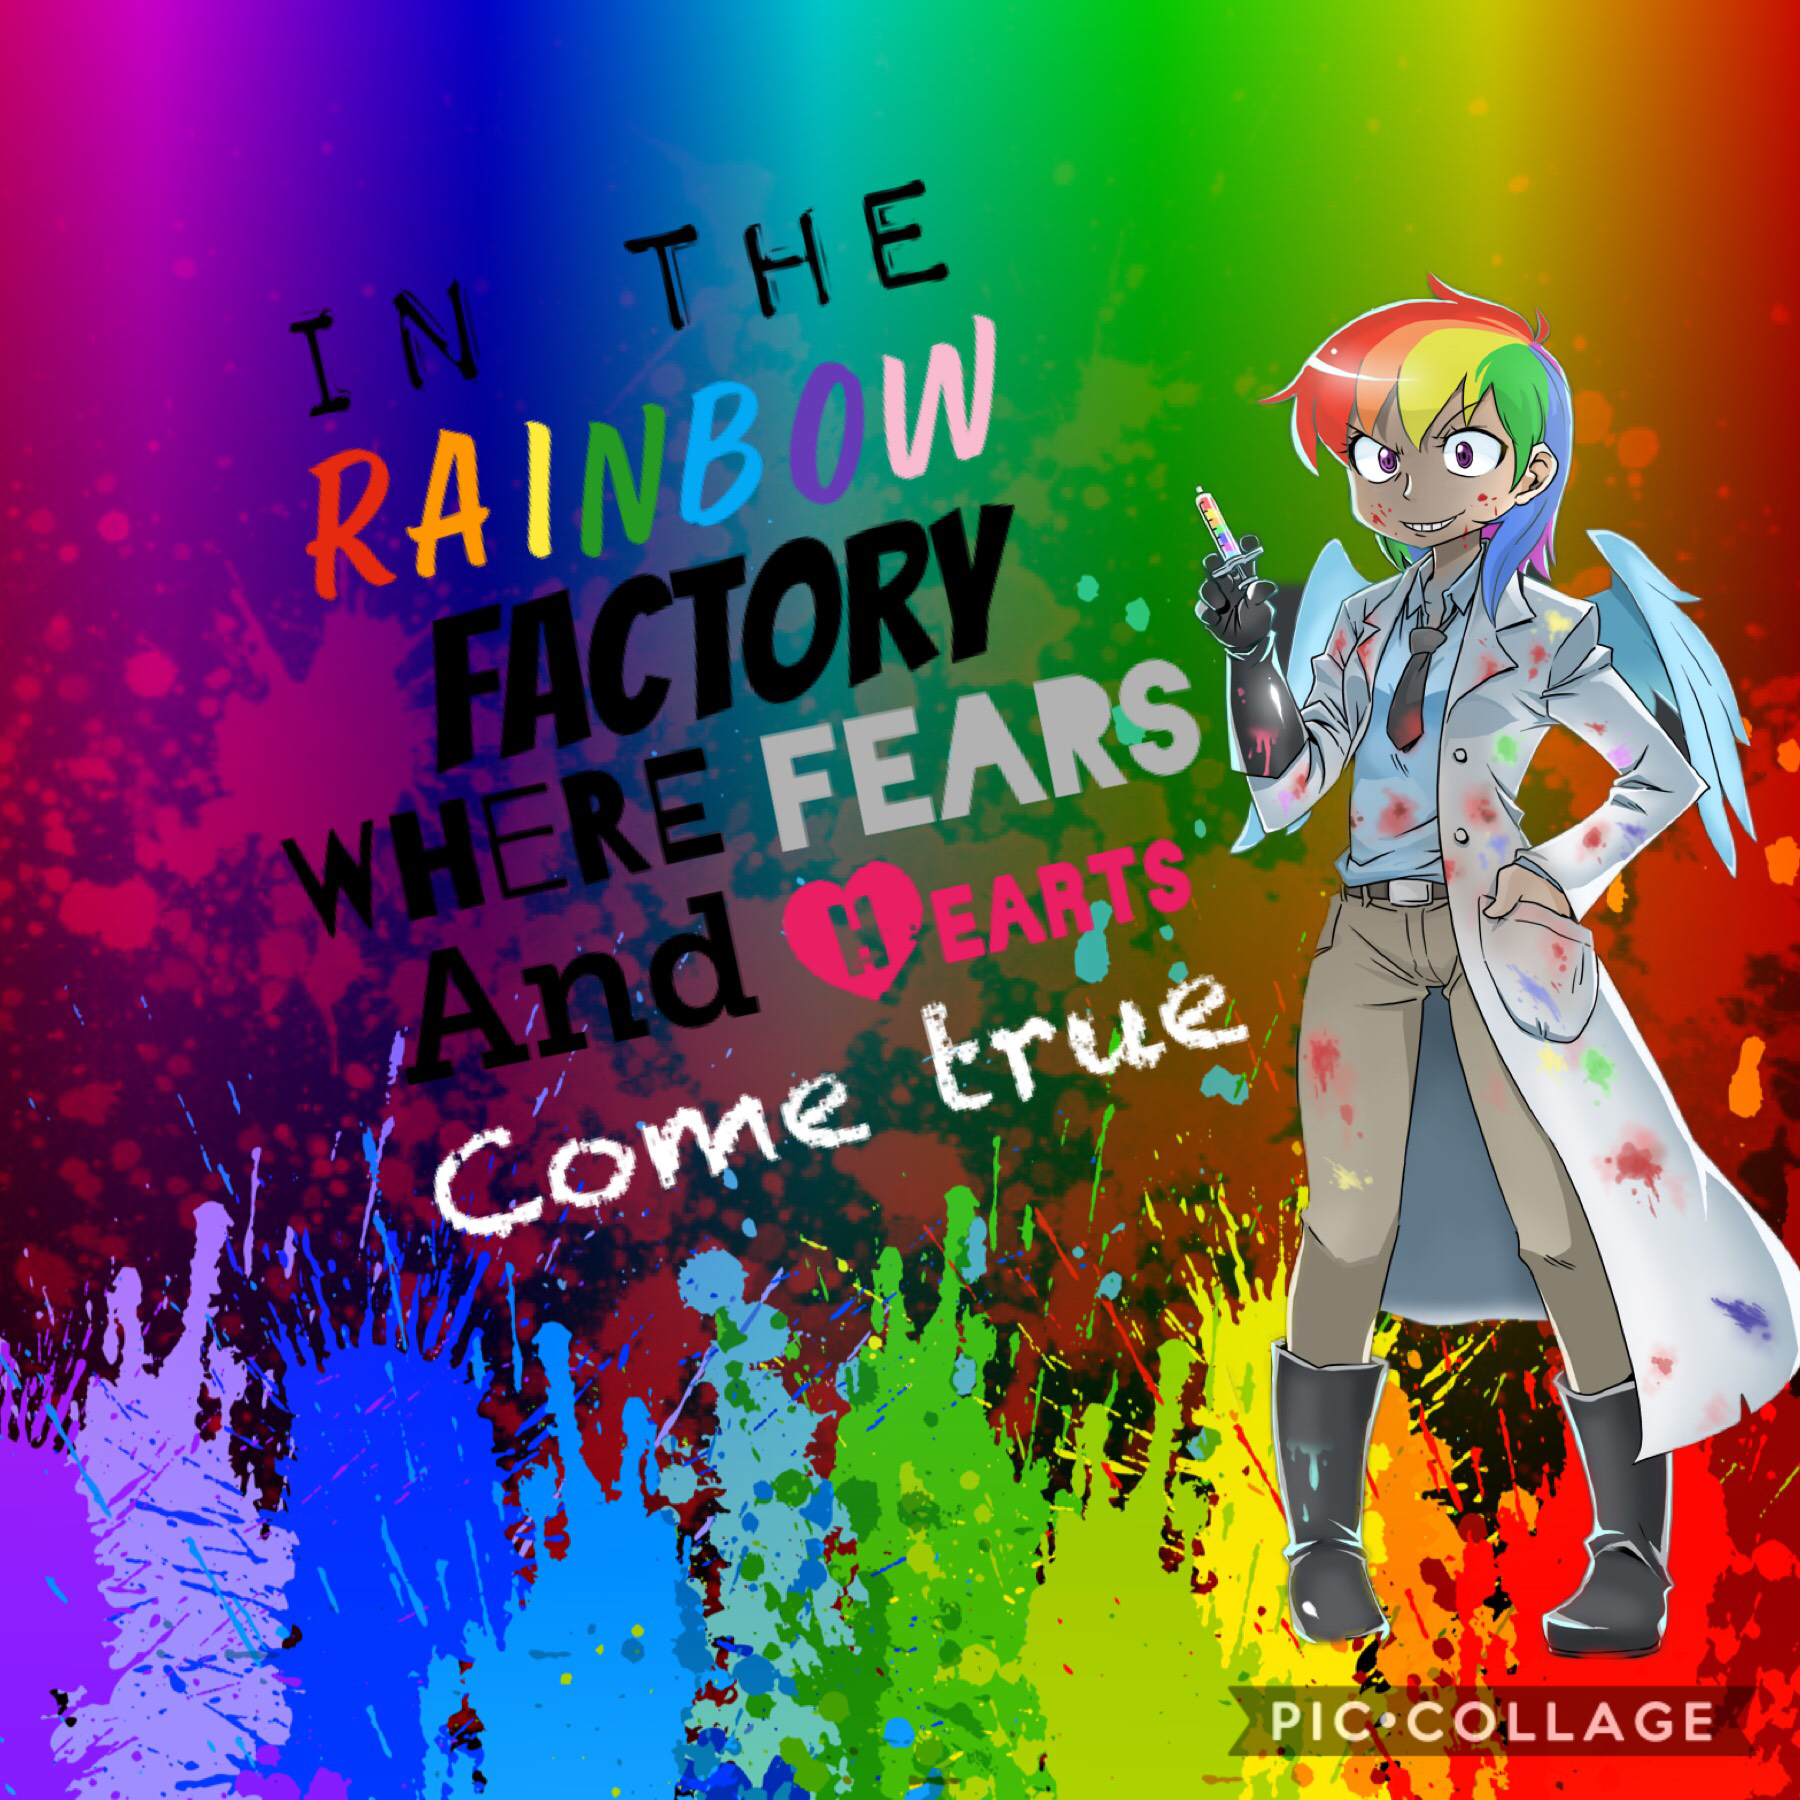 ~In the Rainbow Factory, Where fears and hearts come true~